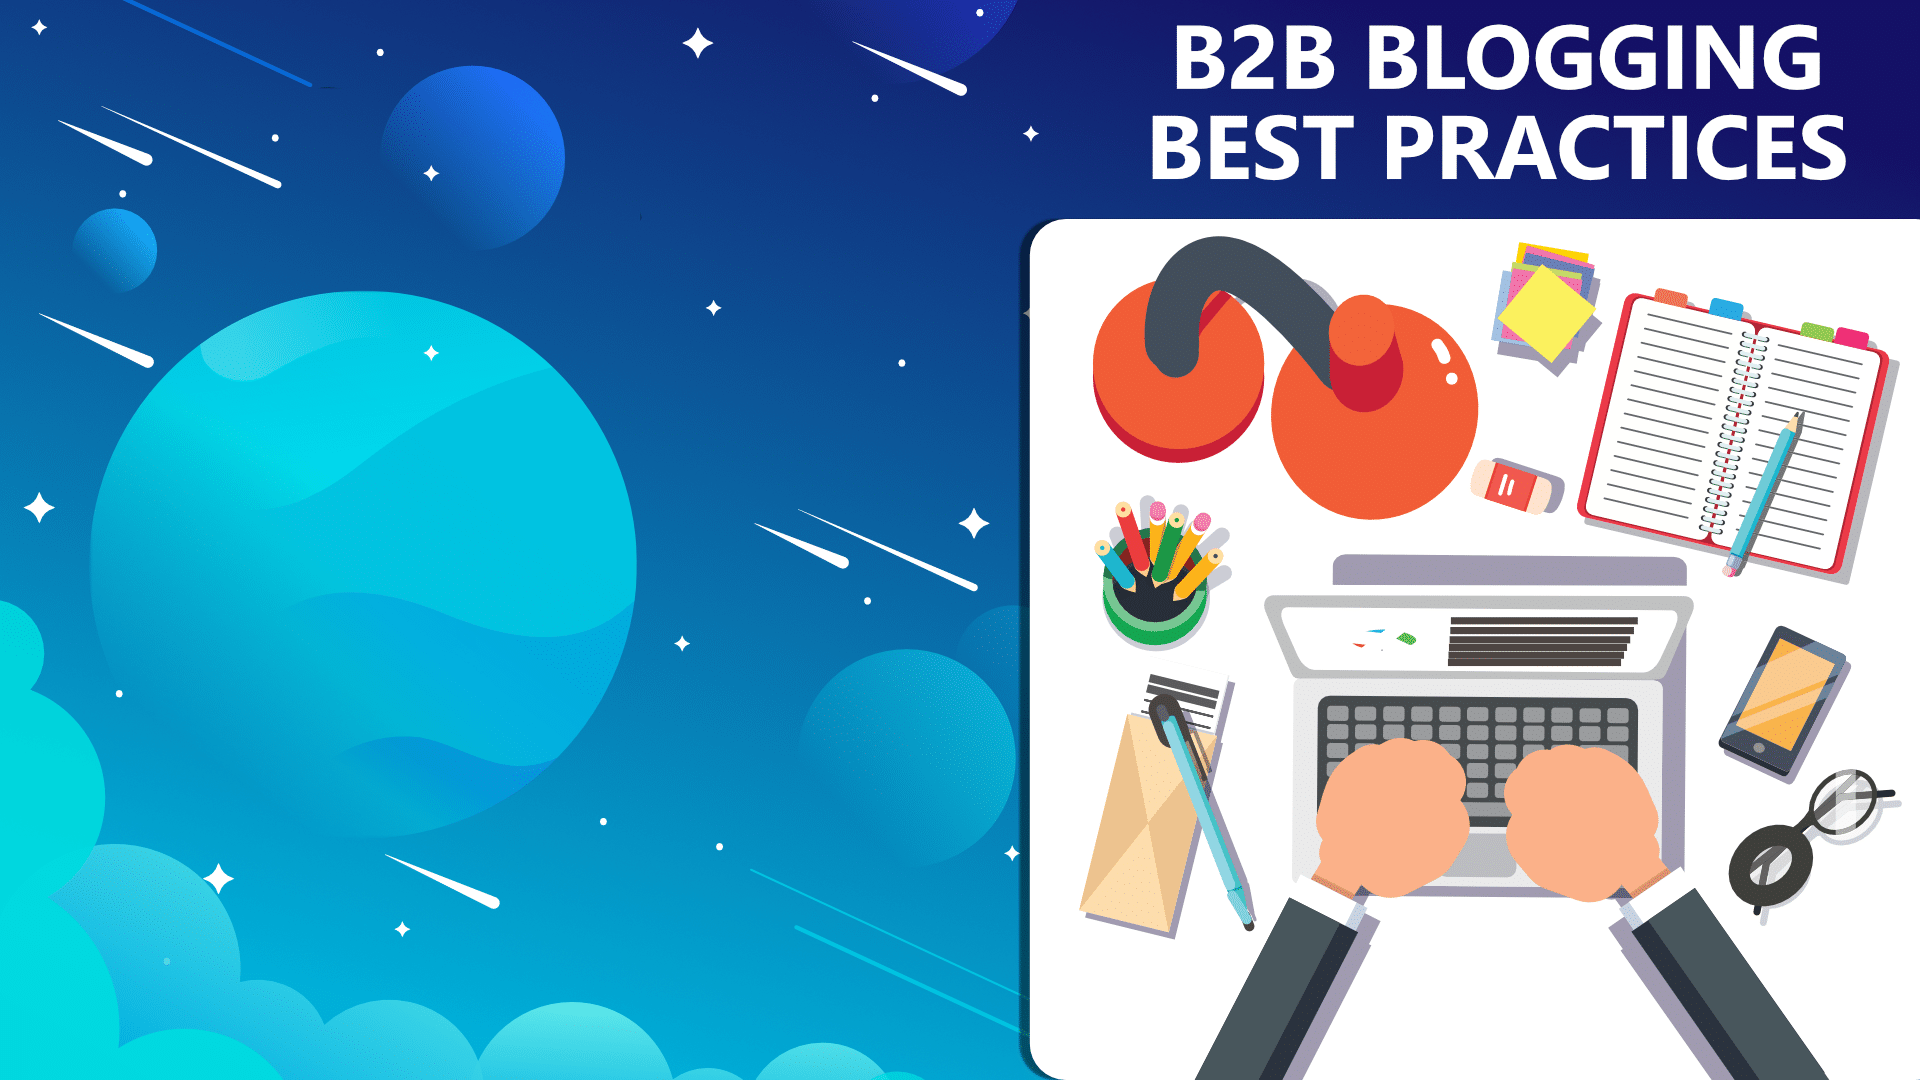 b2b blogging best practices, techniques and strategies